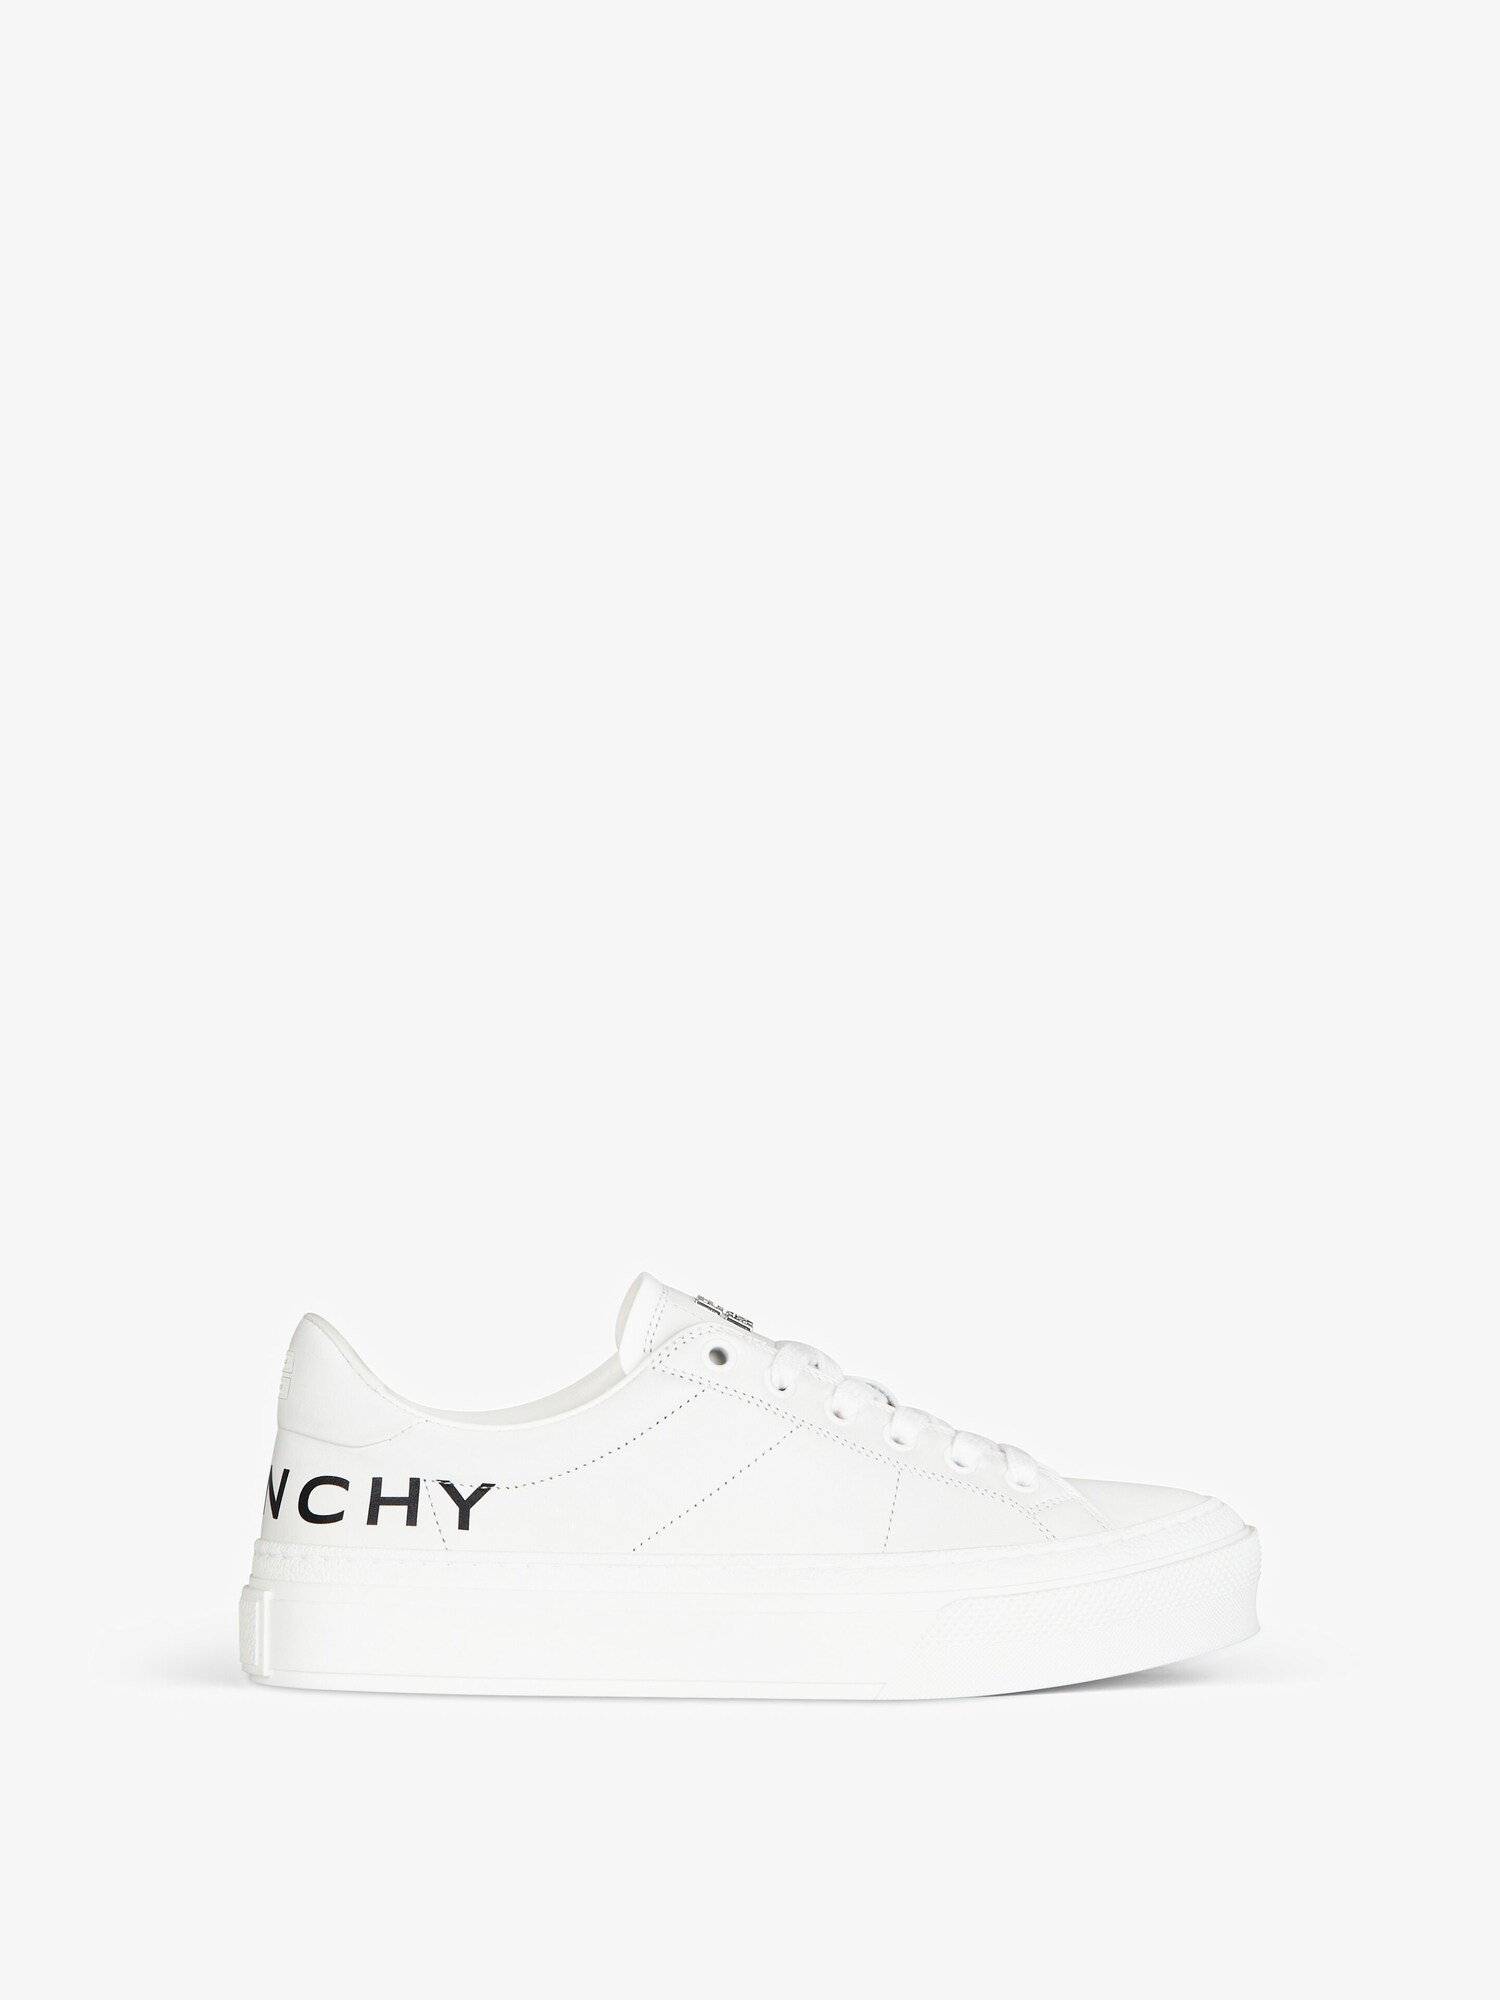 GIVENCHY City Sport sneakers in leather | Givenchy US